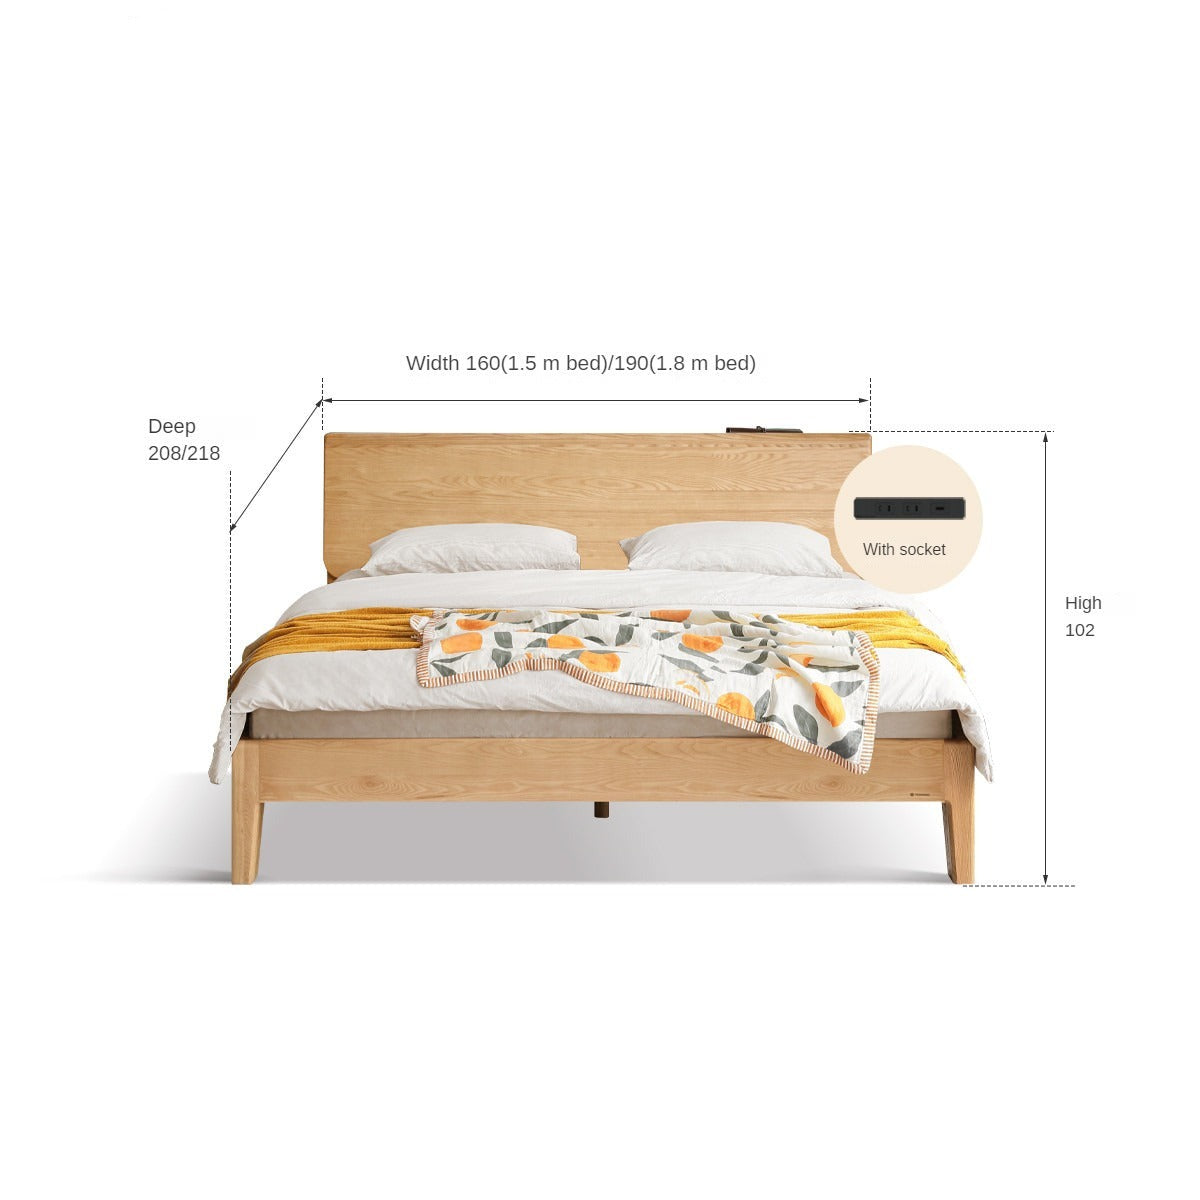 Bed Ash solid wood with socket"_)